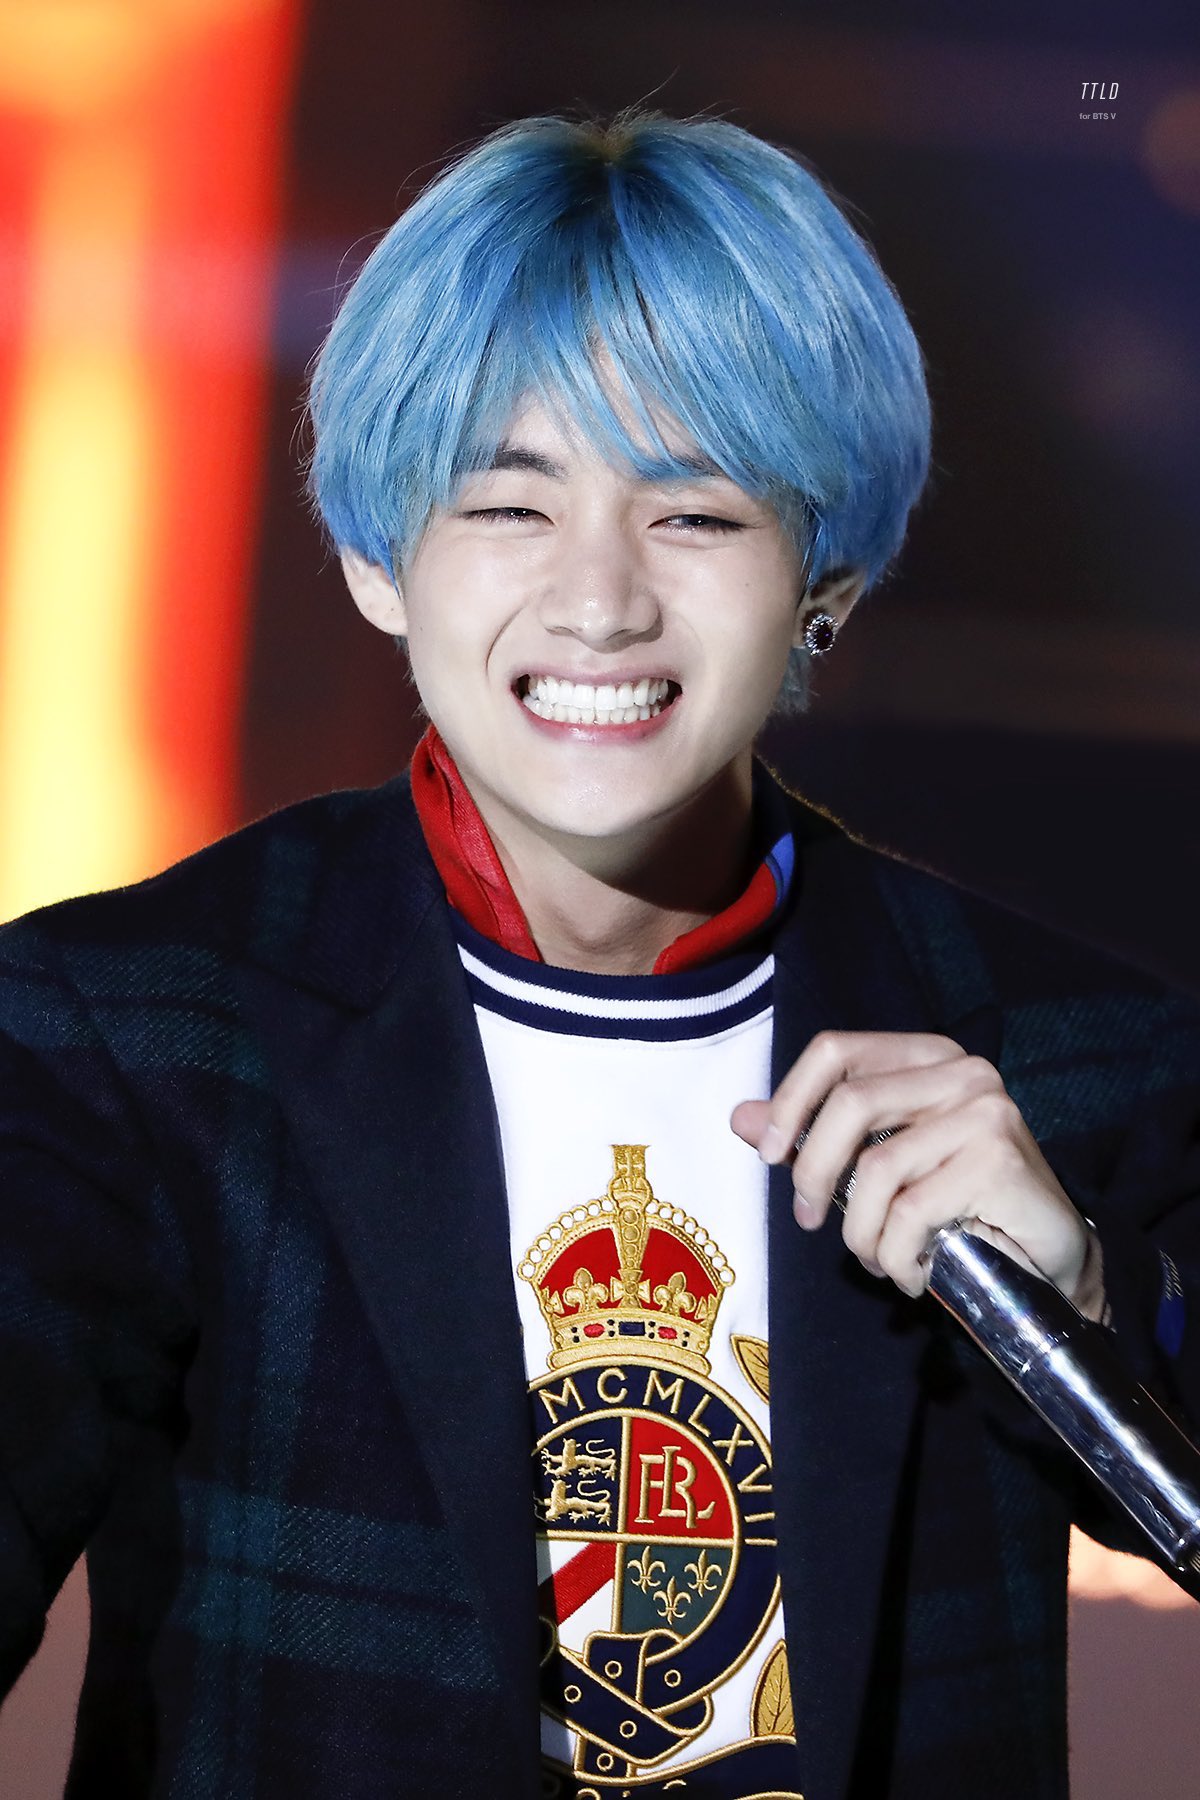 Bts V Uk If You Love Our Winter Bear Taehyung S Boxy Smile Then Reply With Kim Taehyung Precious Baby Bear With These Hashtags To Make Him Smile Even Brighter